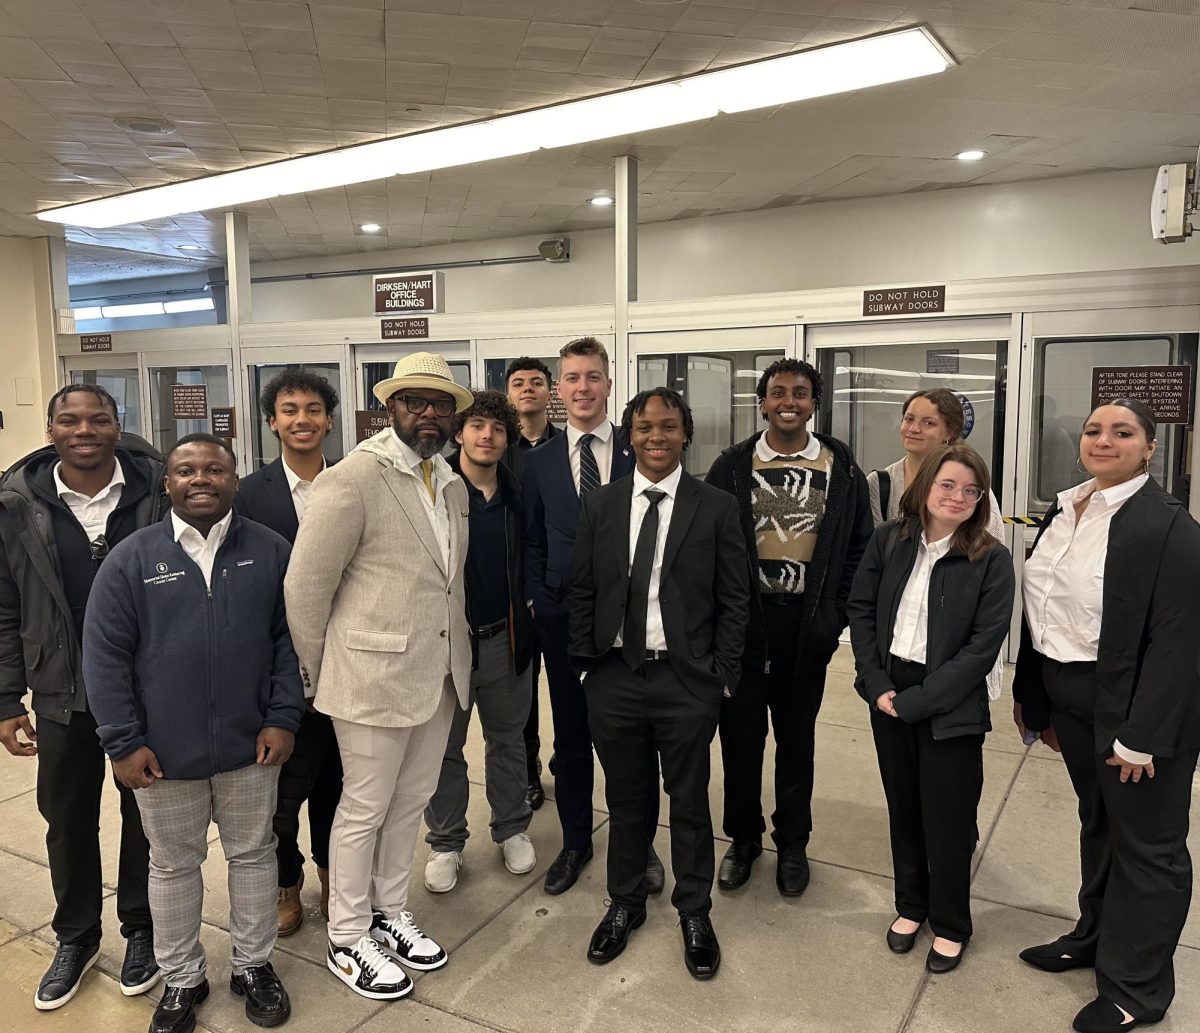 Photo courtesy of Connor Murray. Students from the Iona Criminal Justice Club visit the Capitol subway in Washington D.C. during a club trip.